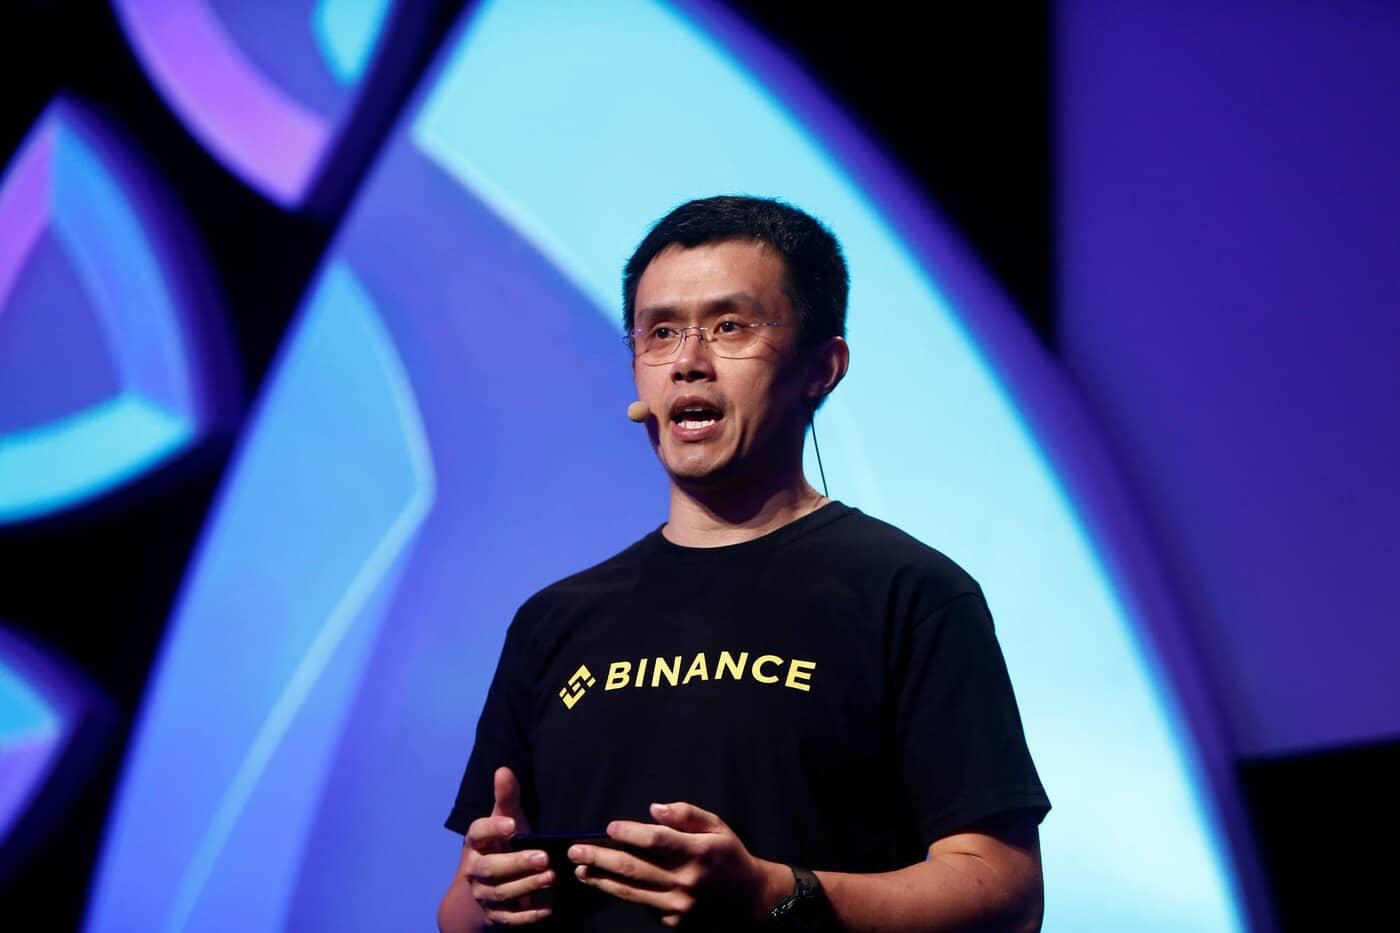 Binance Founder Changpeng Zhao Sentenced to Four Months in Prison